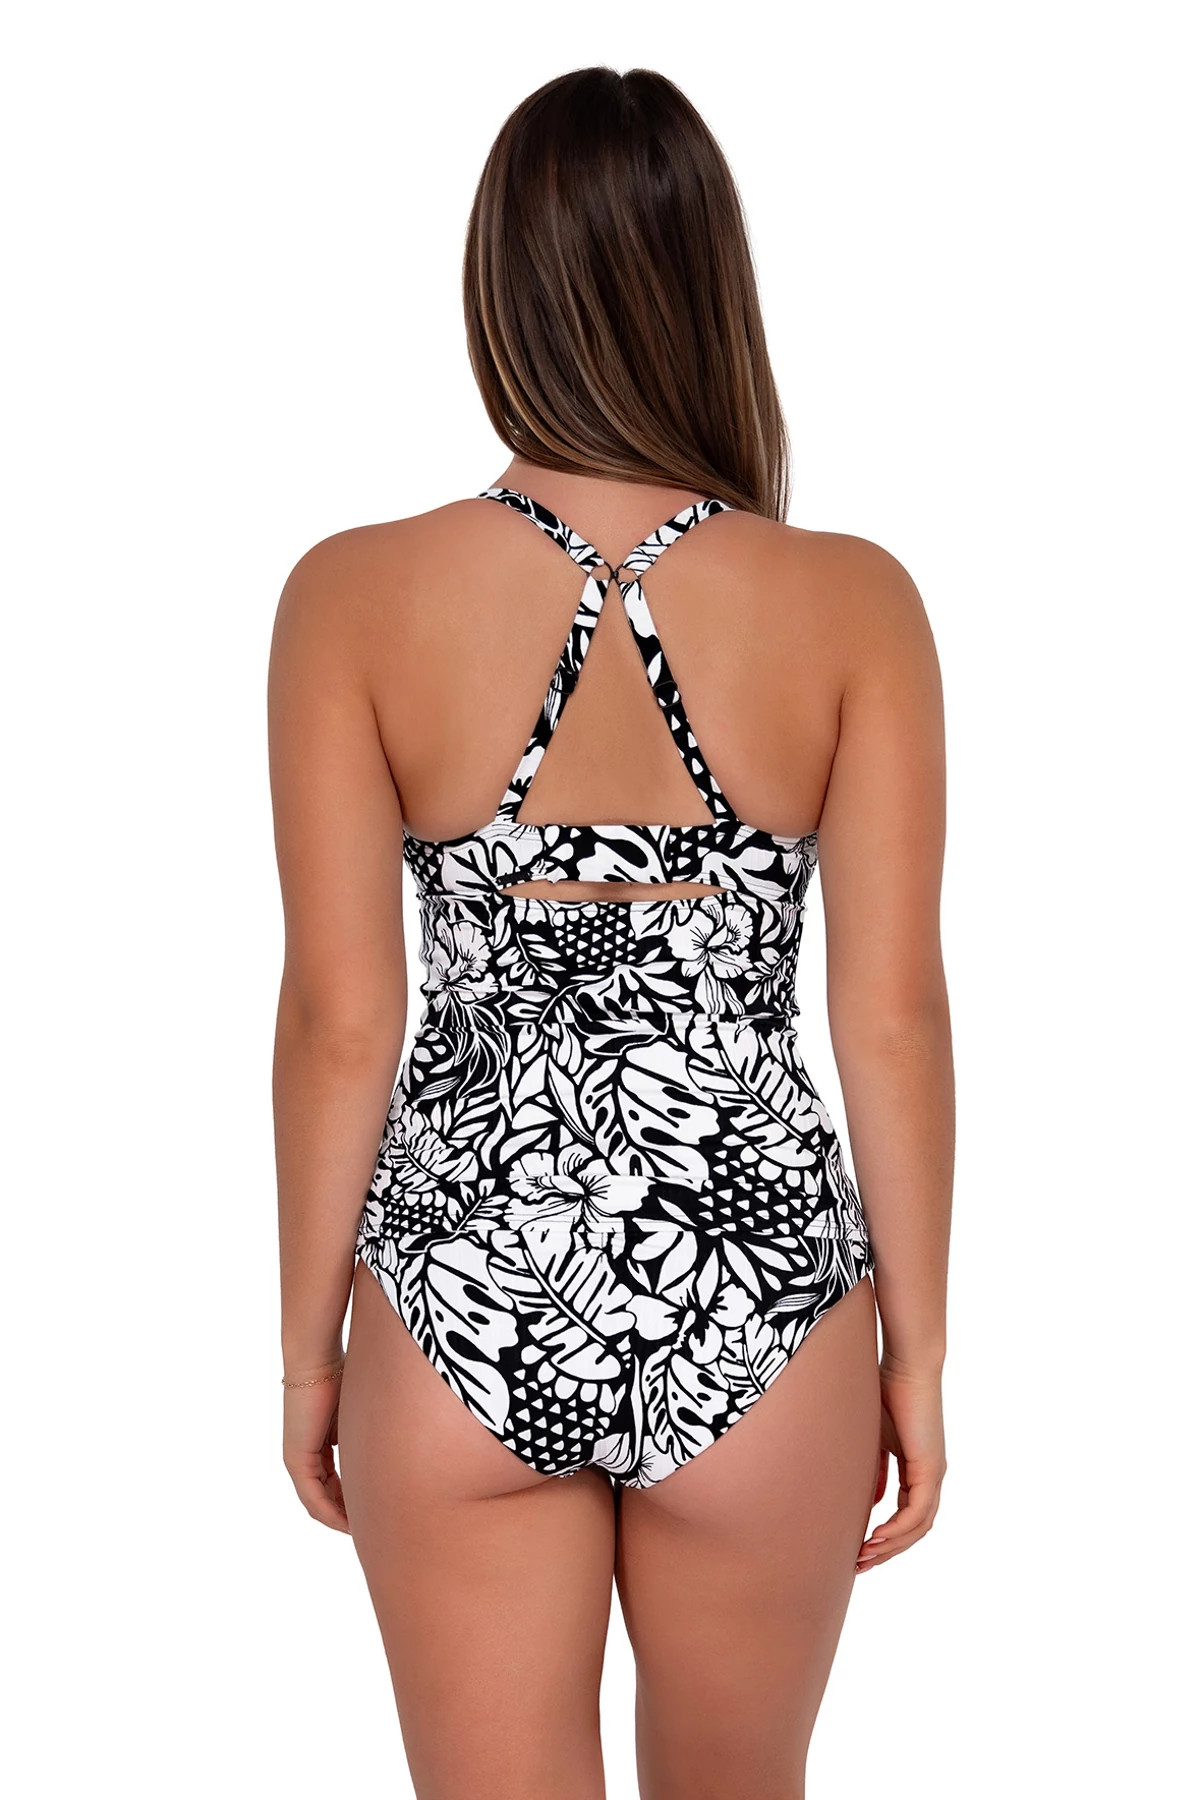 CARIBBEAN SEAGRASS TEXTURE Serena Underwire Tankini Top (E-H Cup) image number 2